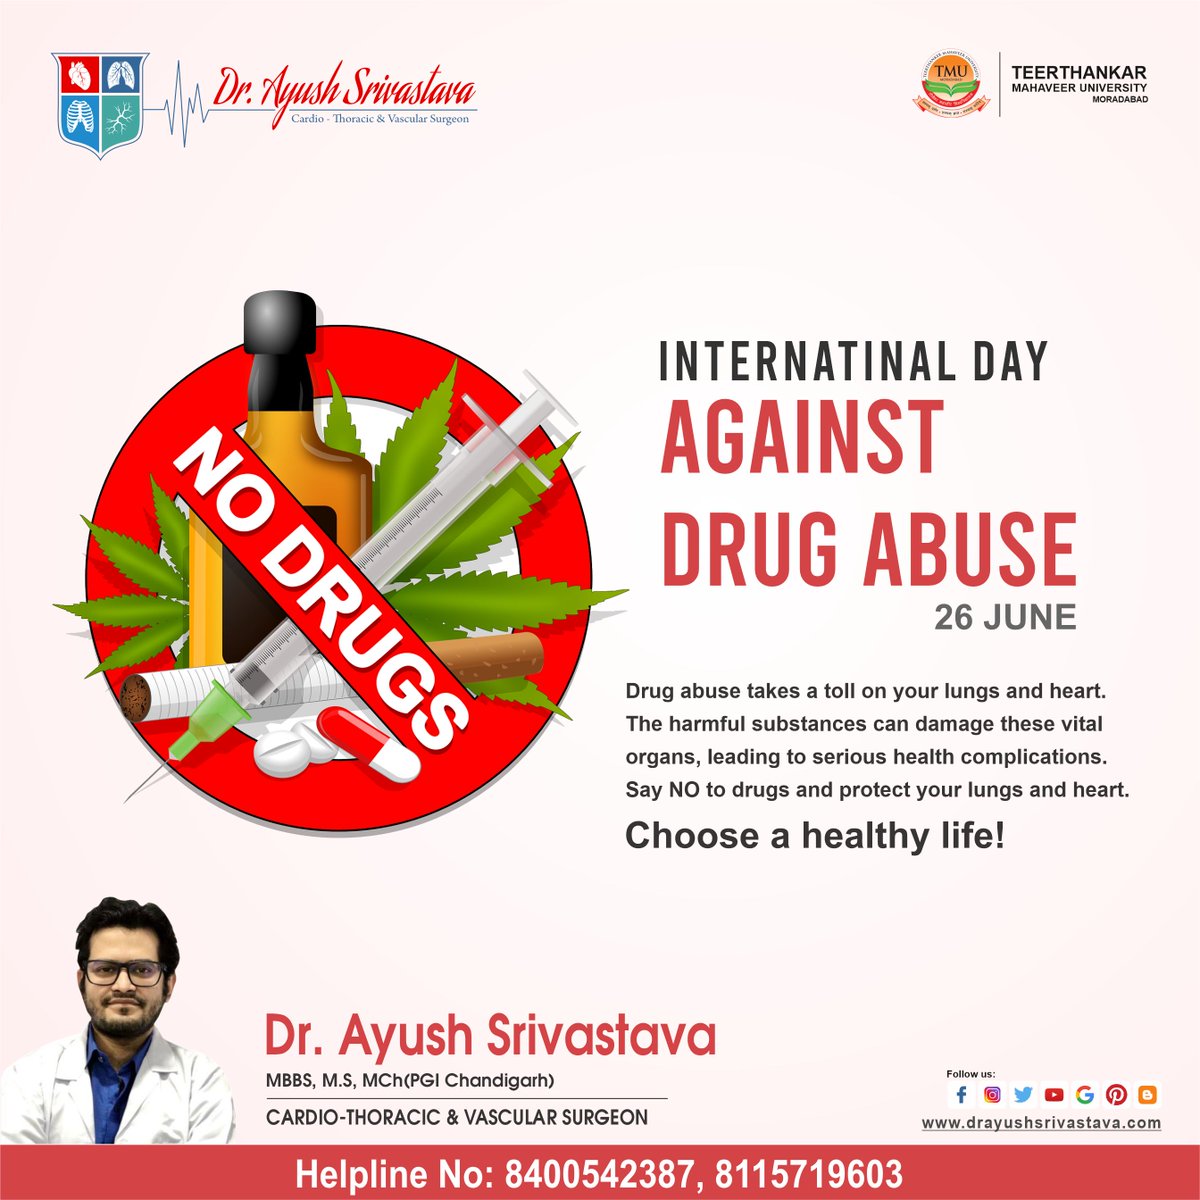 Internatinal Day Against Drug Abuse
26 JUNE

Drug abuse takes a toll on your lungs and heart. The harmful substances can damage these vital organs, leading to serious health complications. Say NO to drugs and protect your lungs and heart. 

#nodrugabuse #stopdrugabuse